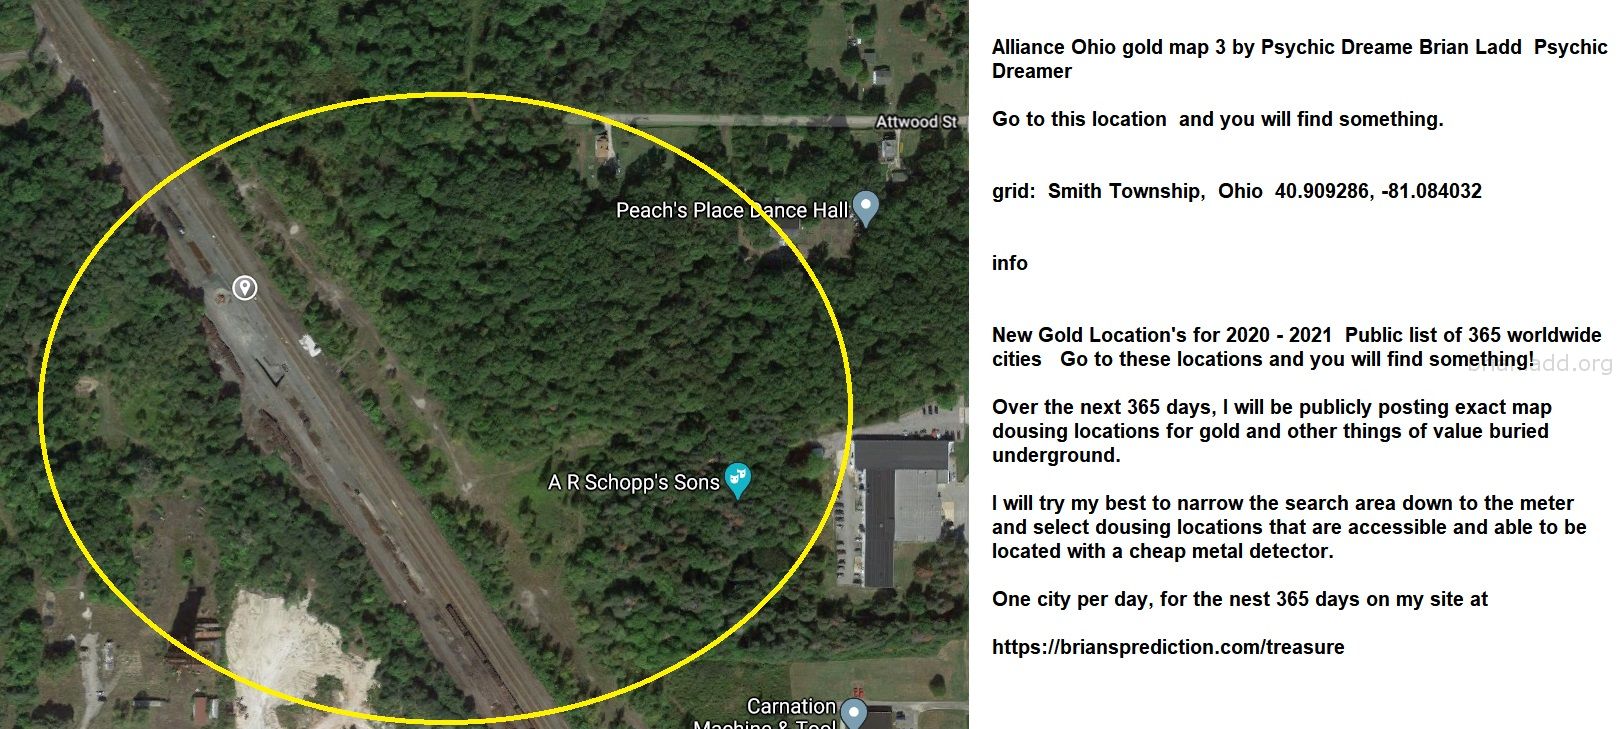 Alliance Ohio Map 3 By Psychic Dreame Brian Ladd Psychic Dreamer - (850)562-8383 Tara Calico Works Here, Lives in Beacon...
(850)562-8383 Tara Calico Works Here, Lives in Beacon Hill Tallahassee, Tara Calico Missing Woman Finally Found! Missing Person Case at   https://briansprediction.com/tara-calico
